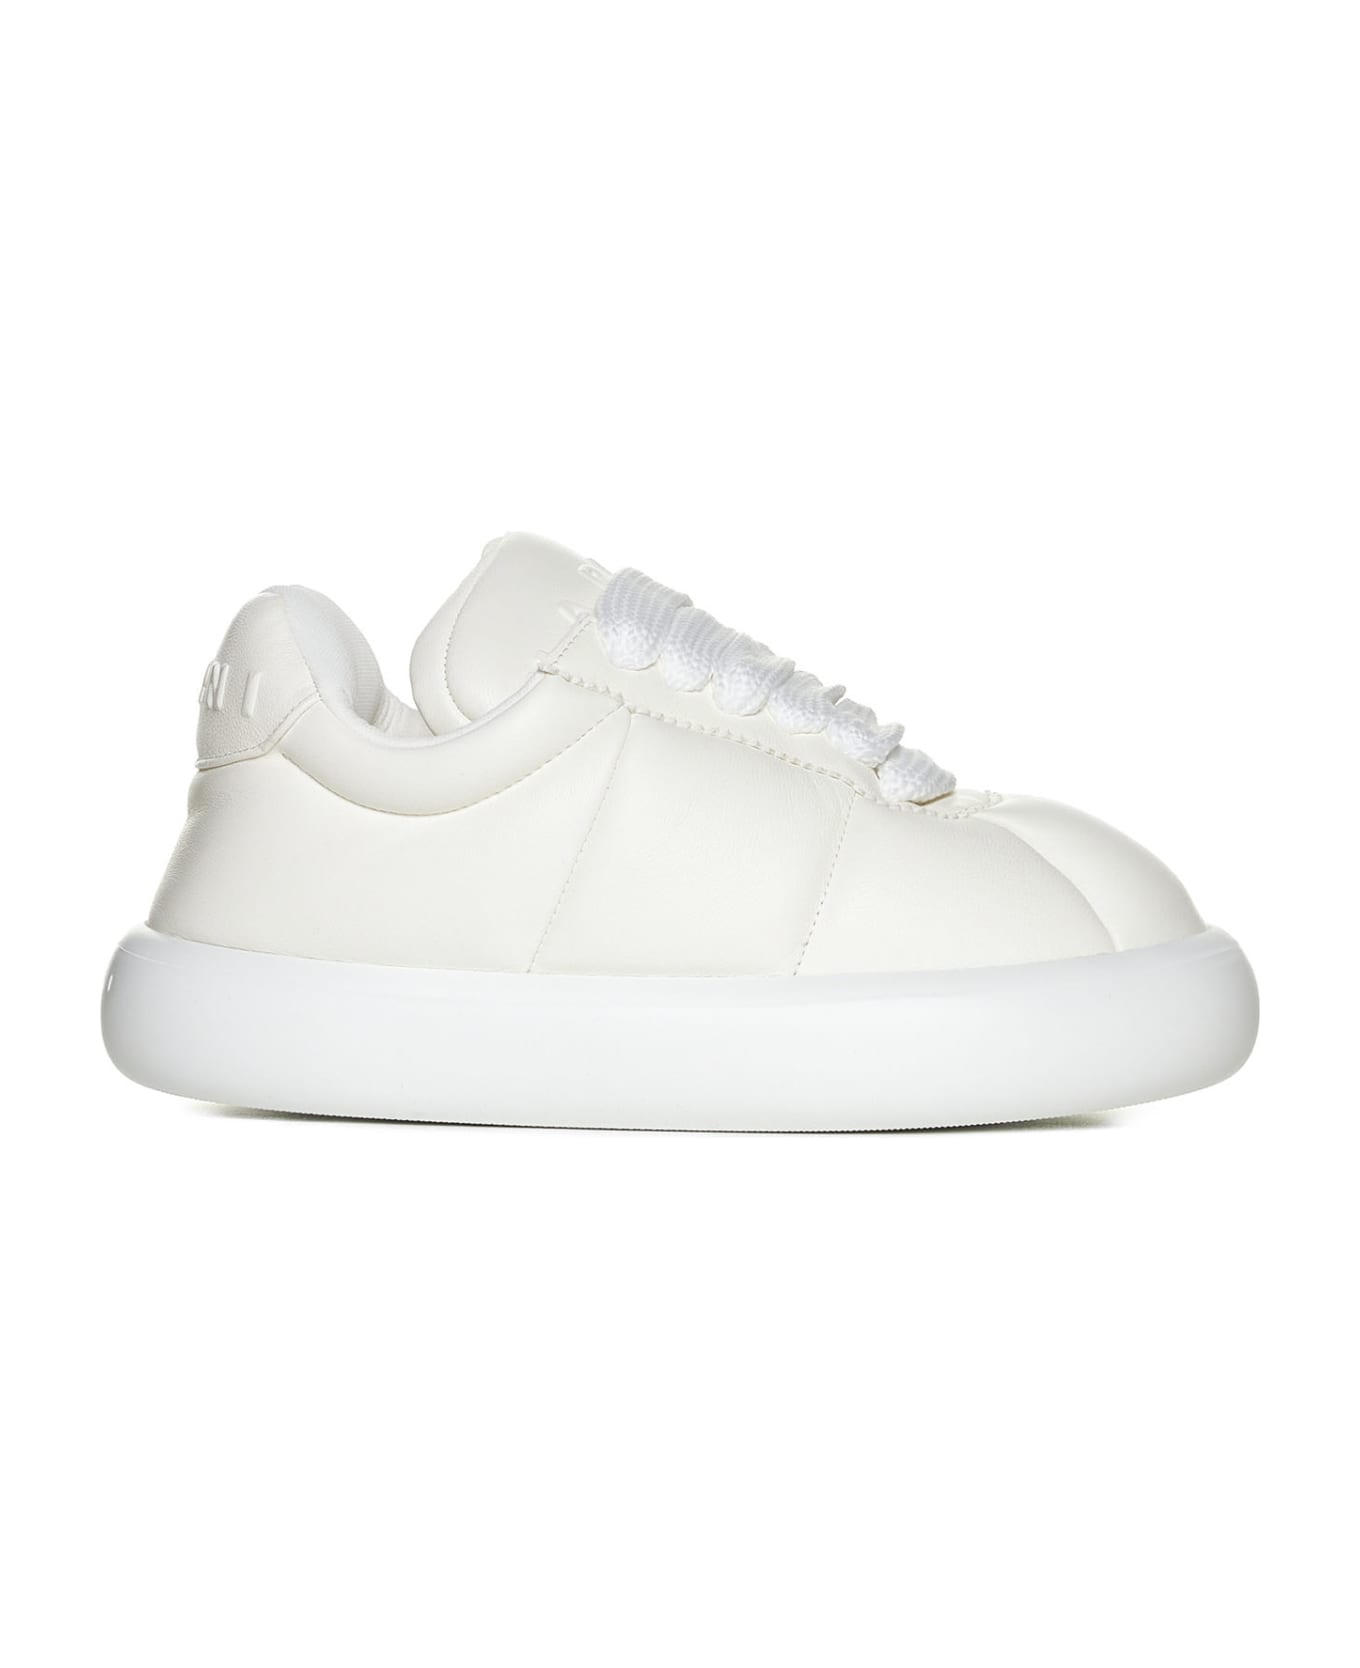 Marni Sneakers - Lily white